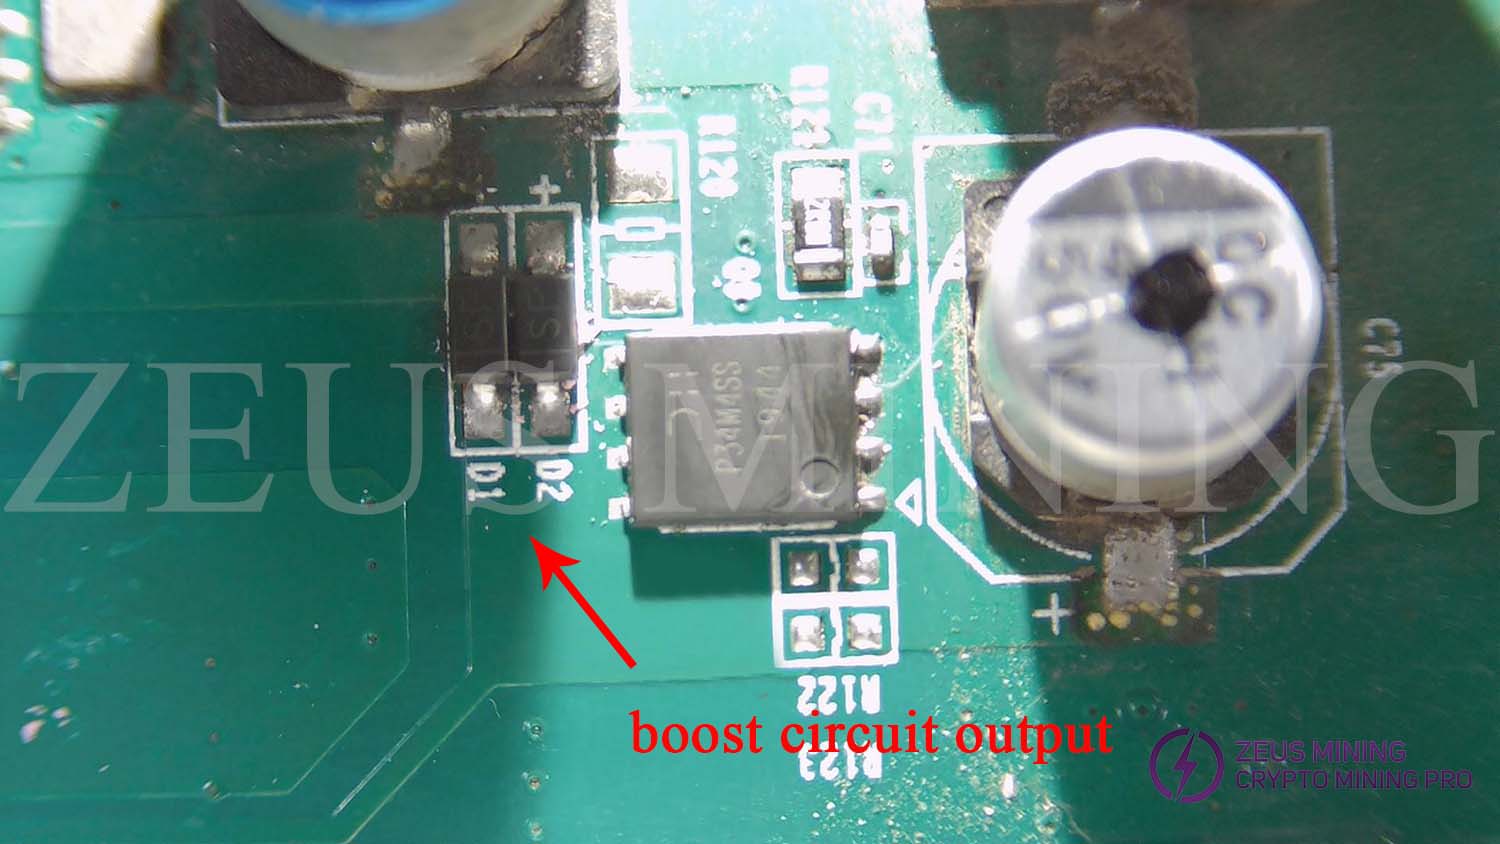 check the boost circuit output